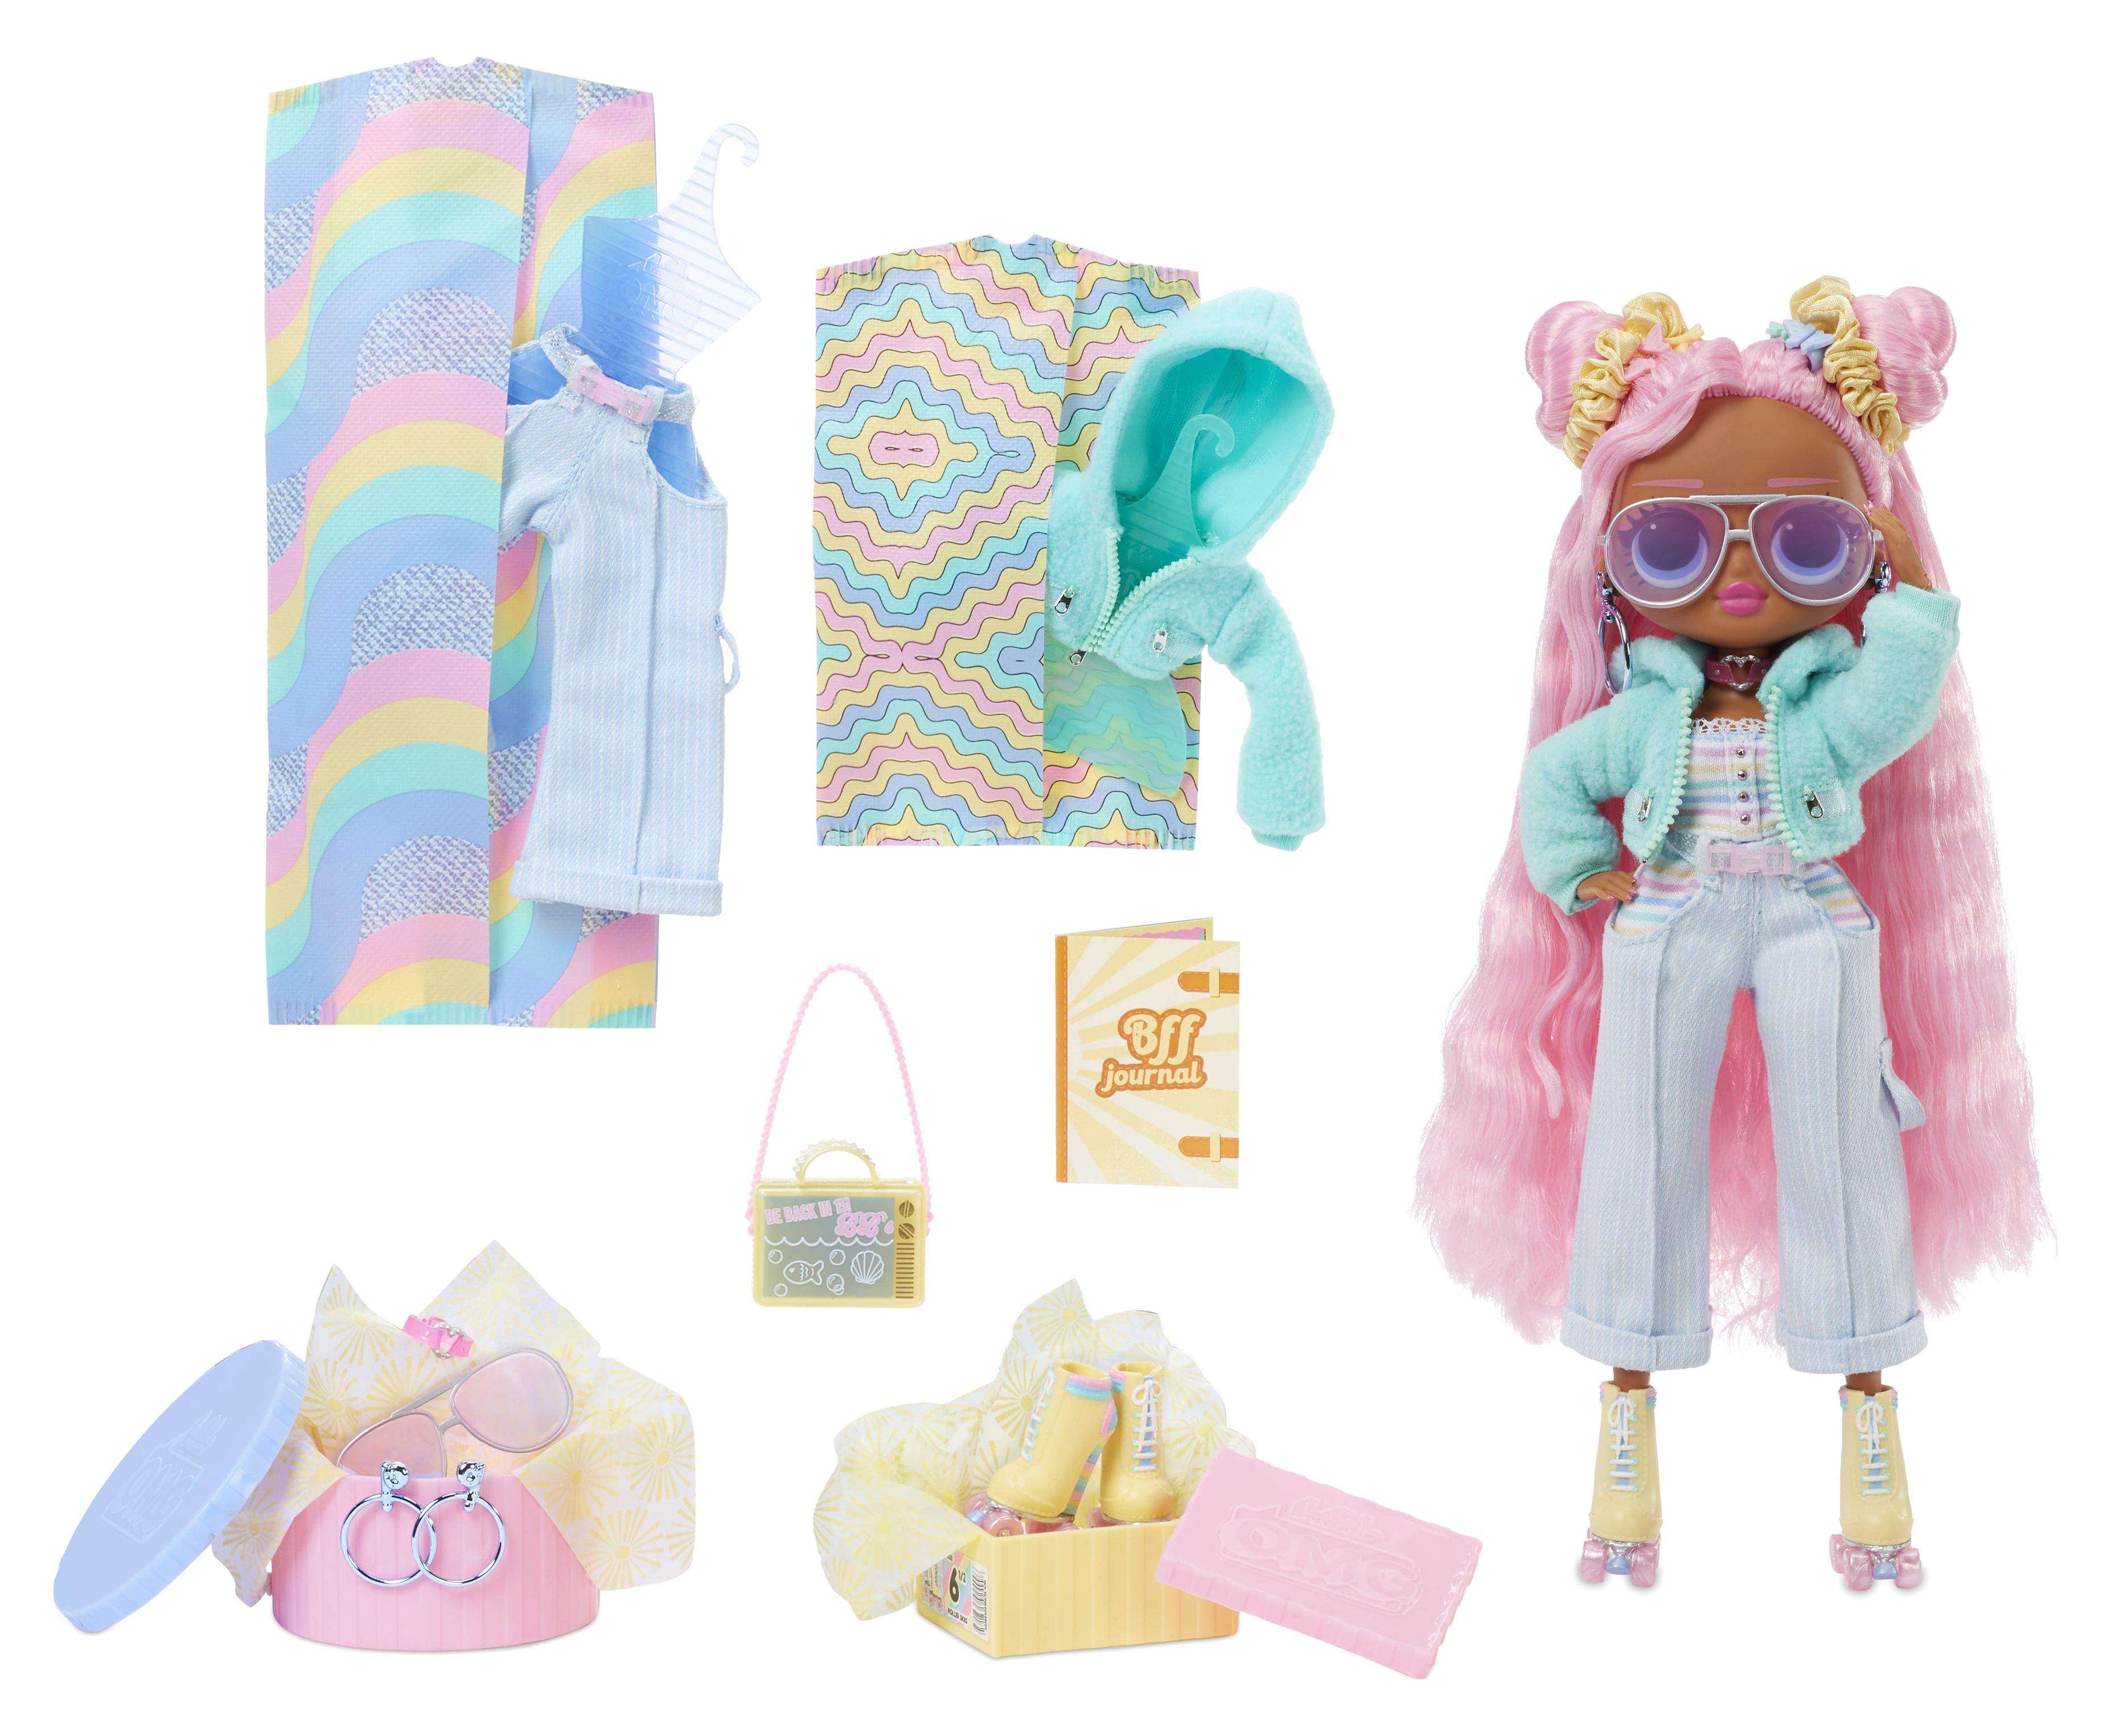 LOL Surprise OMG Sunshine Gurl Fashion Doll - Dress Up Doll Set With 20 Surprises for Girls and Kids 4+ - image 3 of 7